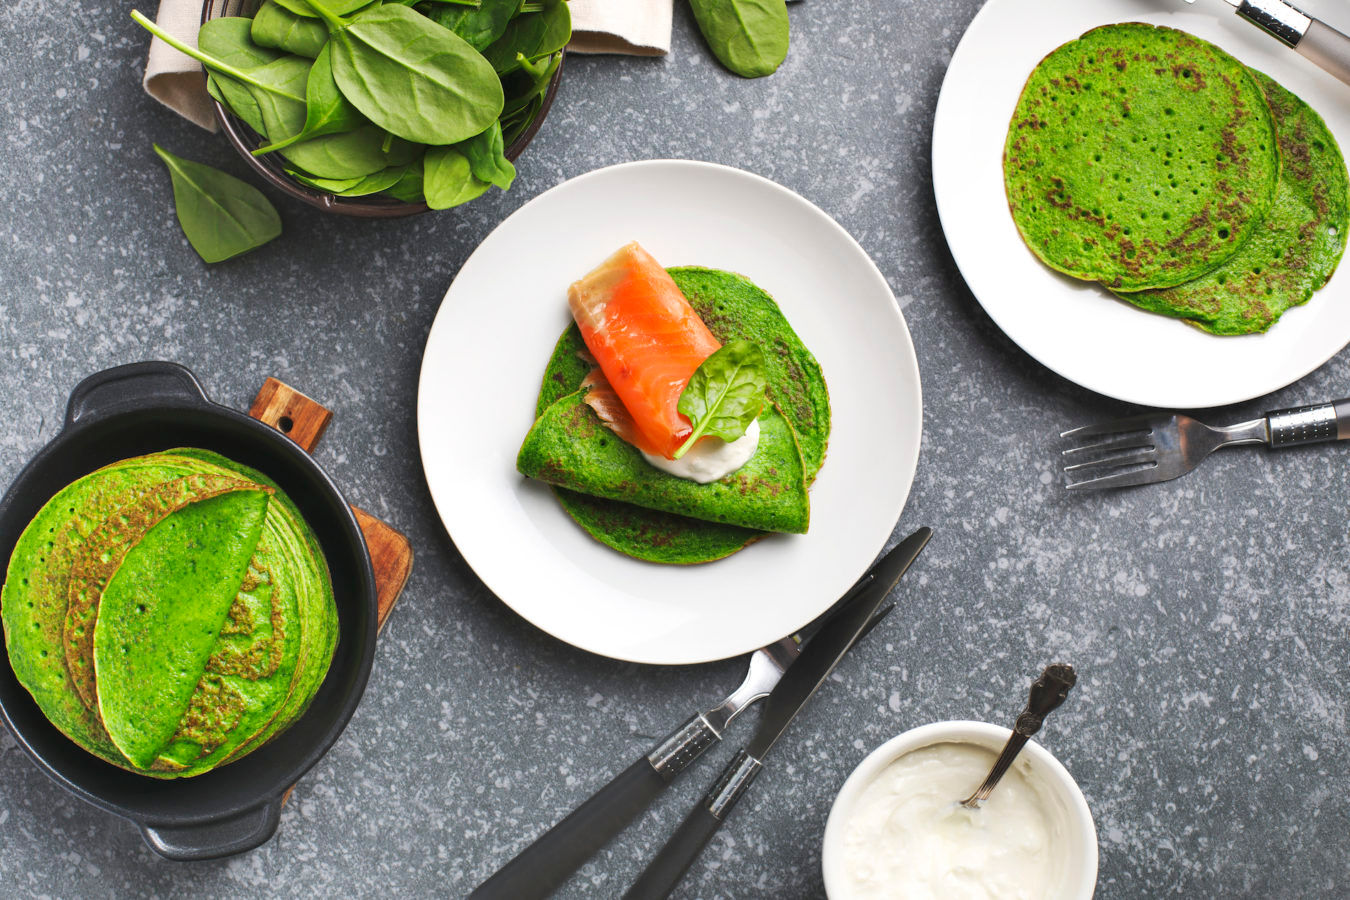 10 spinach recipes you’ll love, from crepes to Korean side dishes